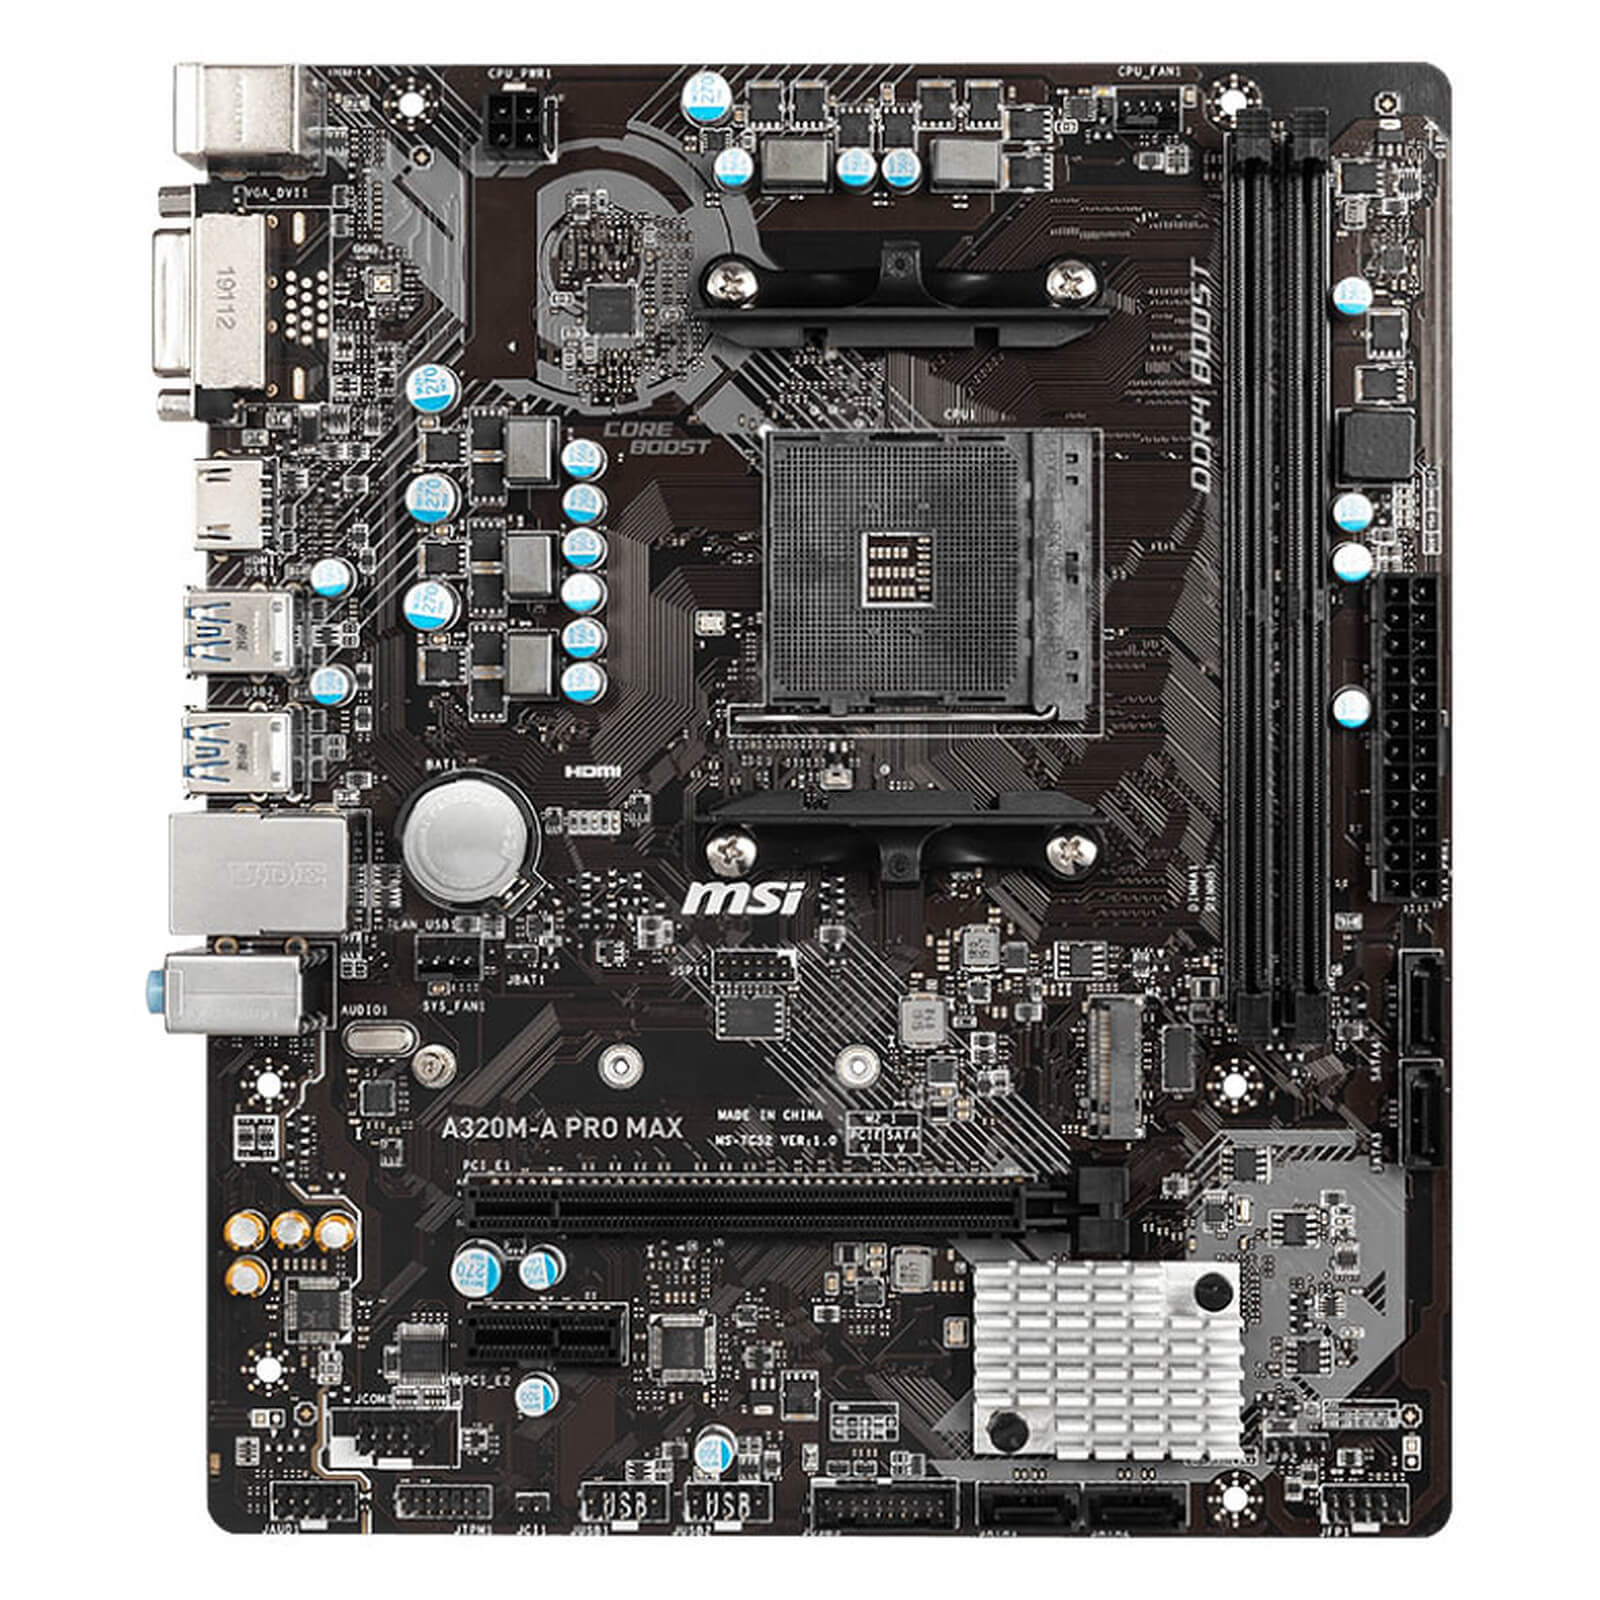 Motherboard MSI A320M-A Pro Max AM4